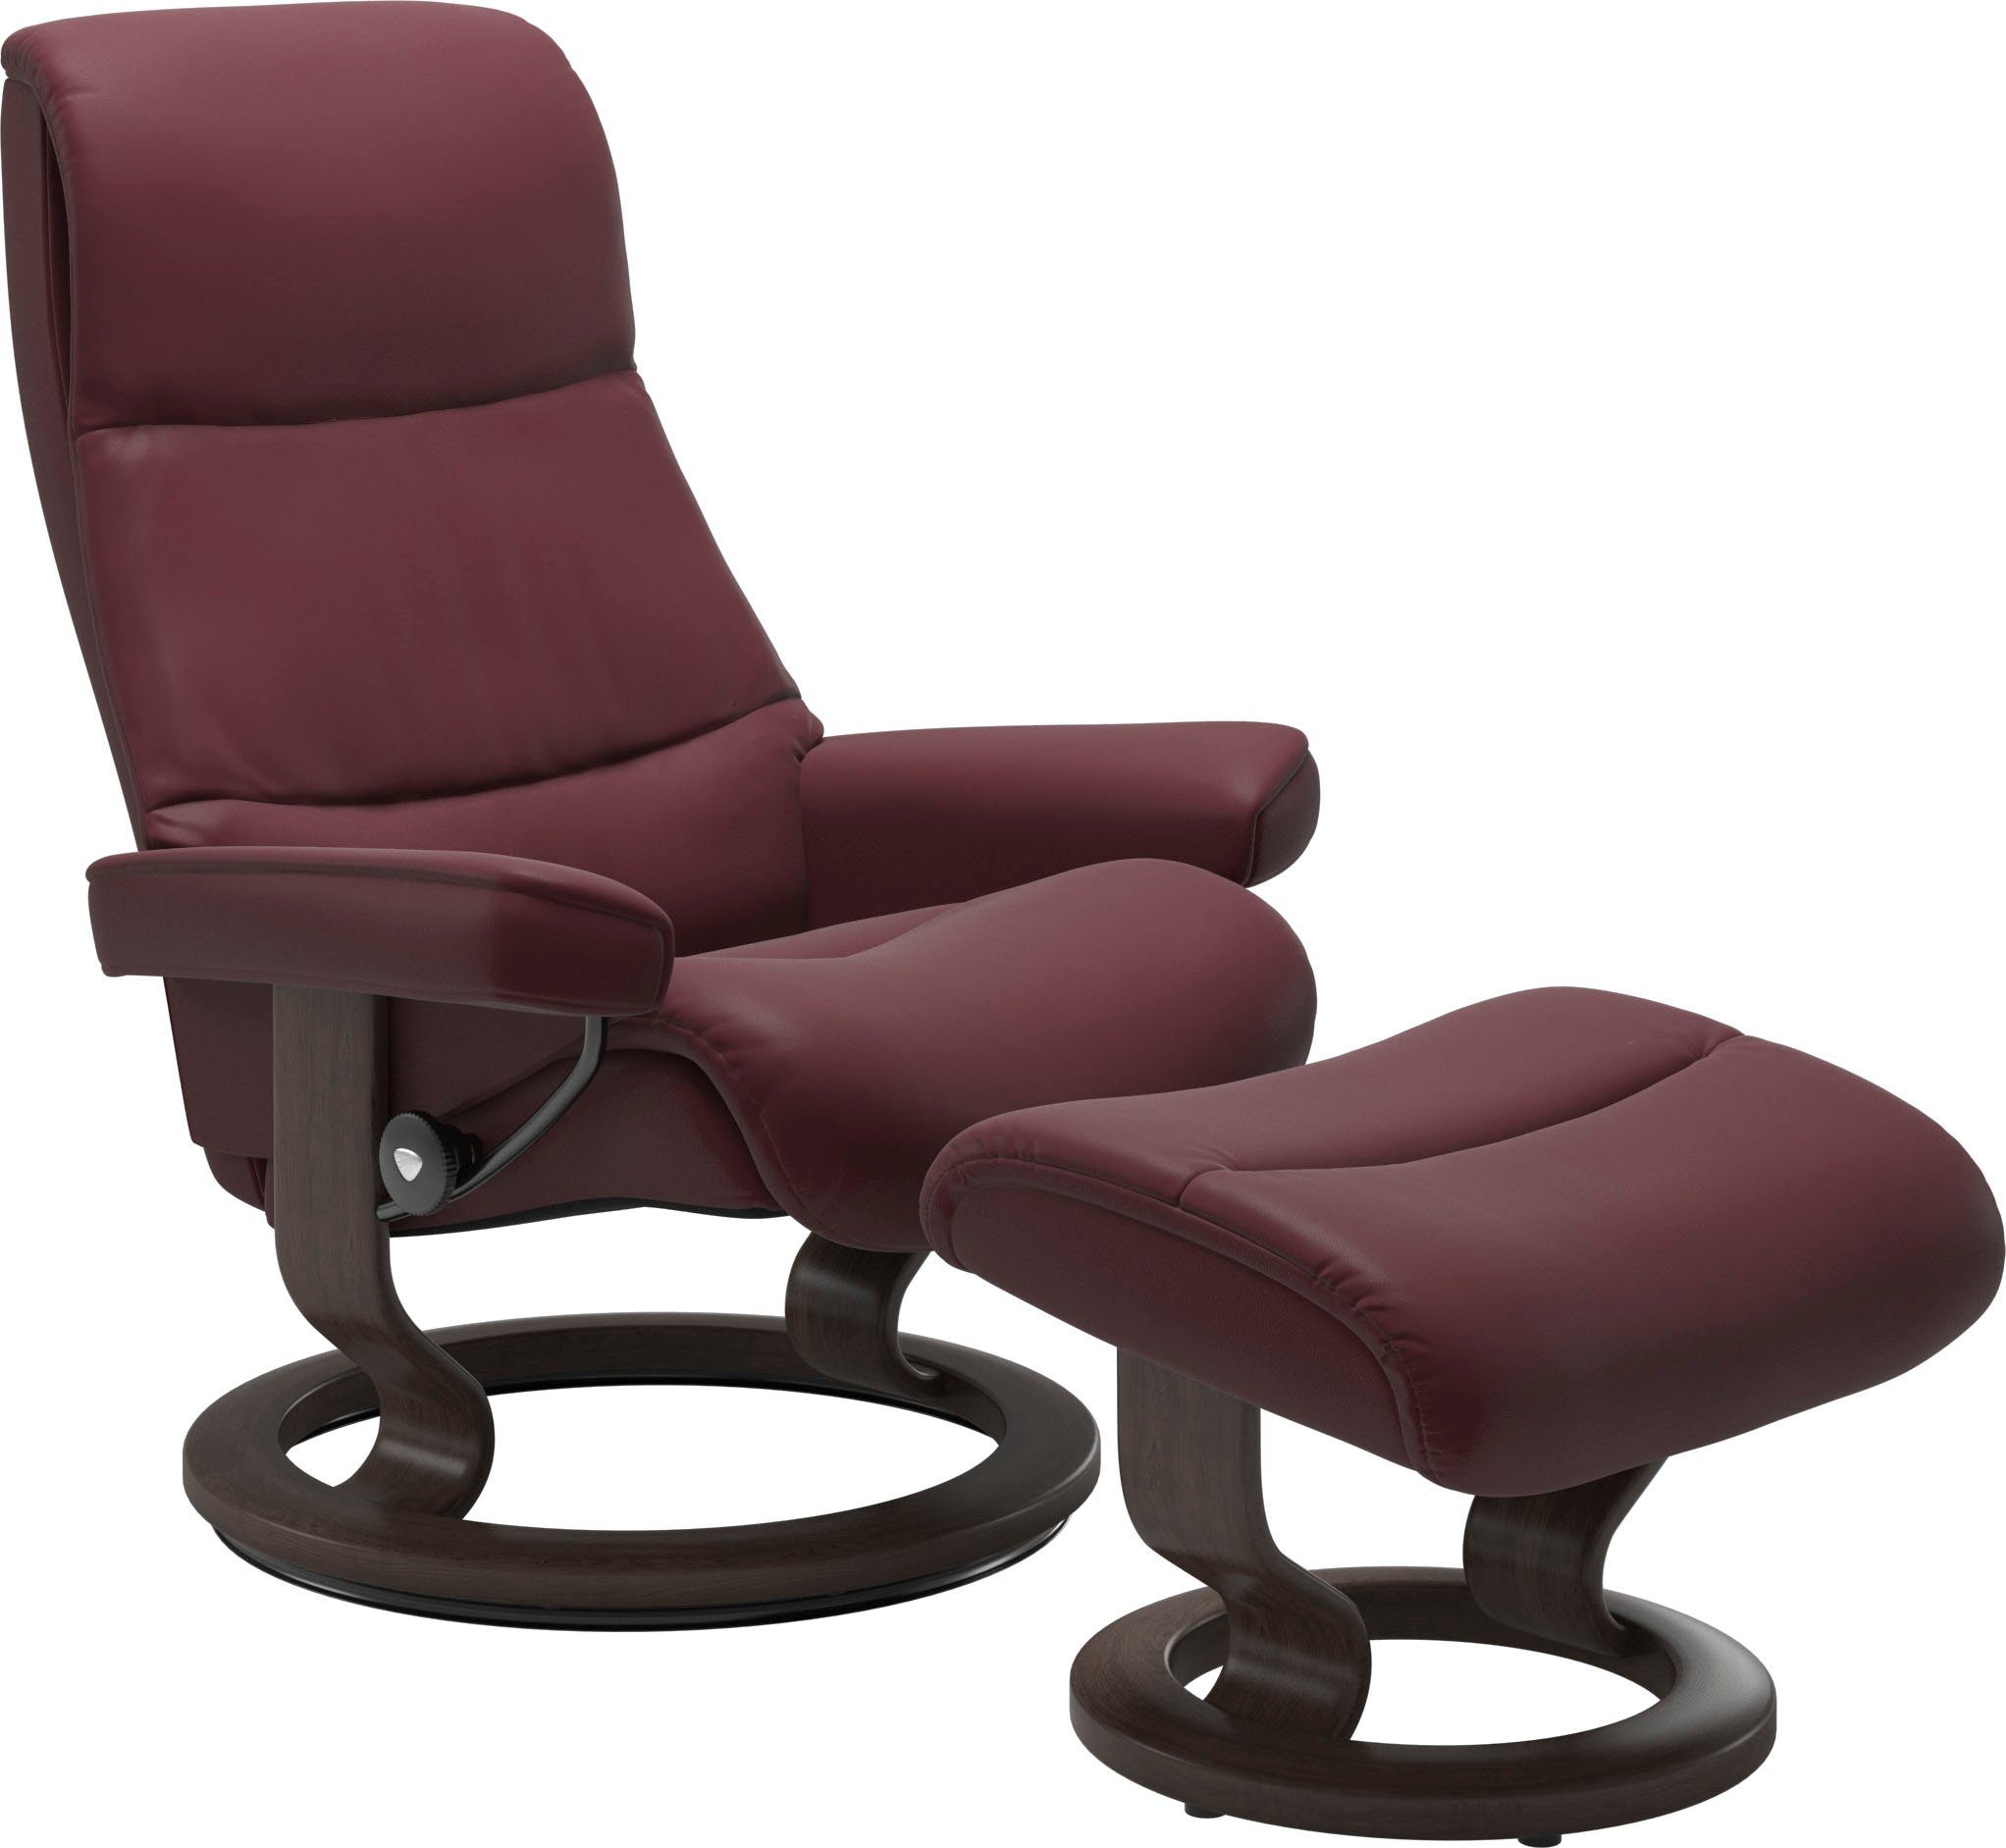 Stressless® Relaxsessel View, mit Wenge L,Gestell Classic Größe Base